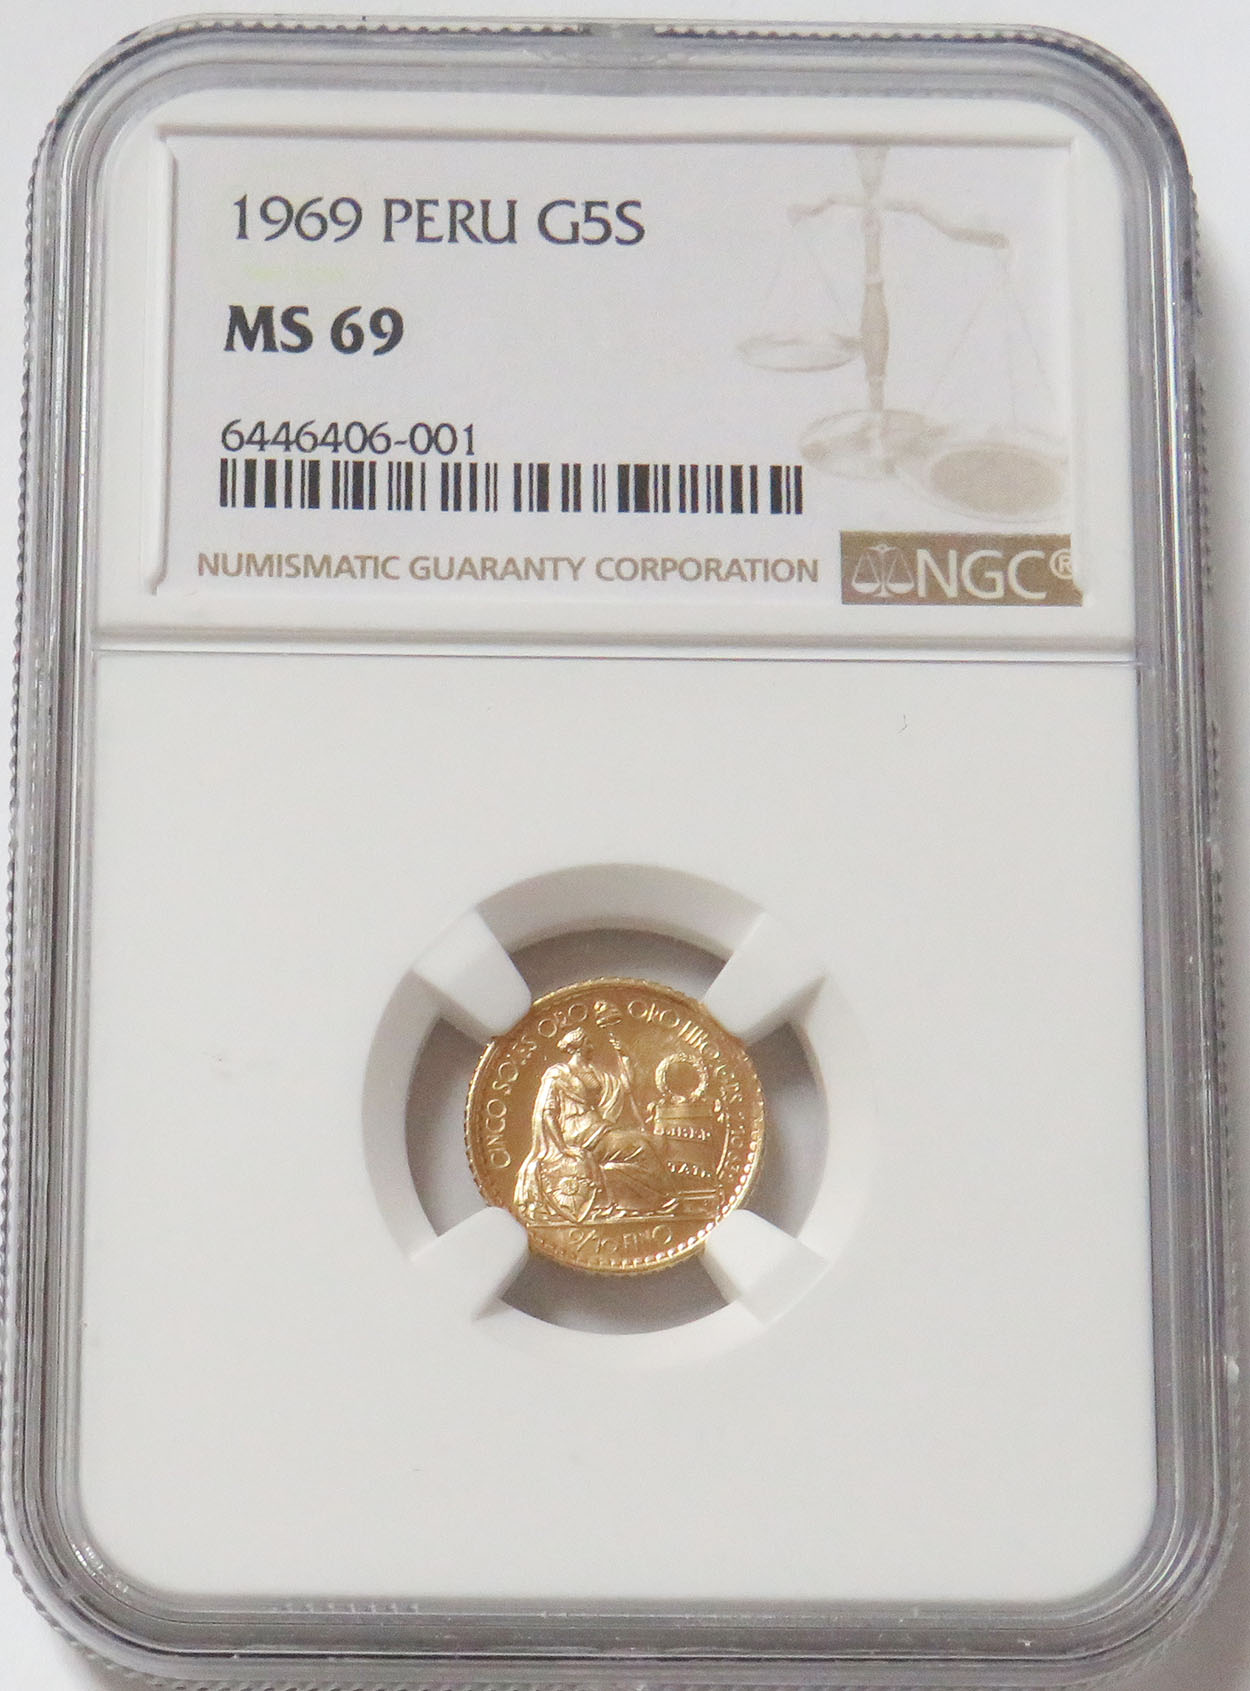 1969 GOLD PERU 5 SOLES NGC MINT STATE 69  FINEST ONE KNOWN KEY DATE ONLY 127 MINTED 